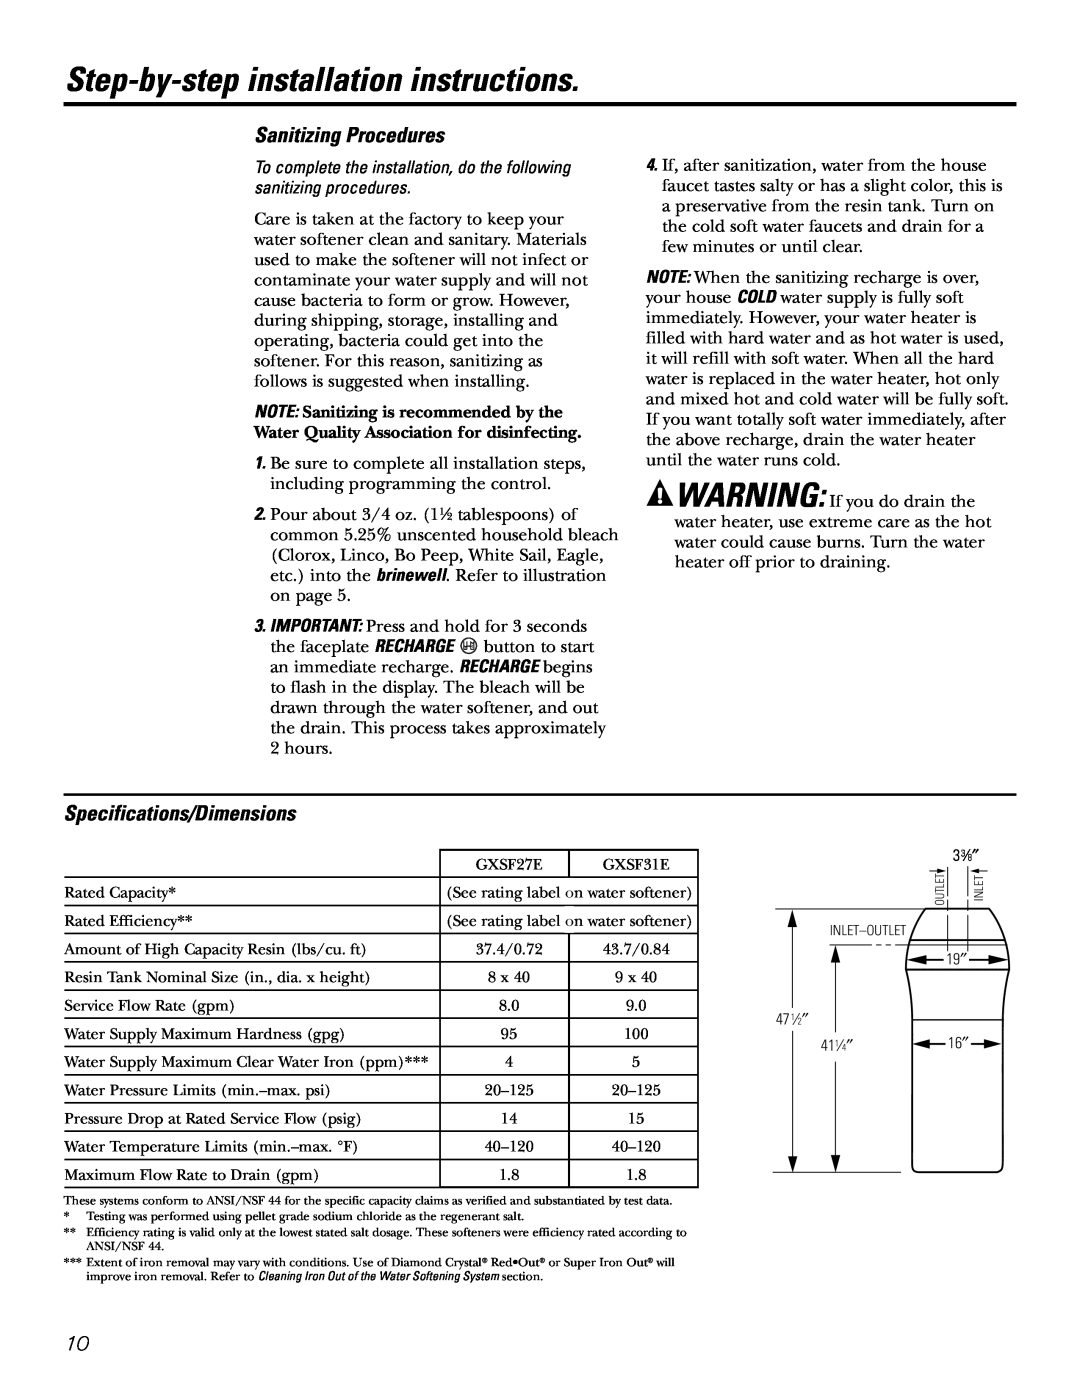 GE GXSF31E Step-by-step installation instructions, Sanitizing Procedures, Specifications/Dimensions 